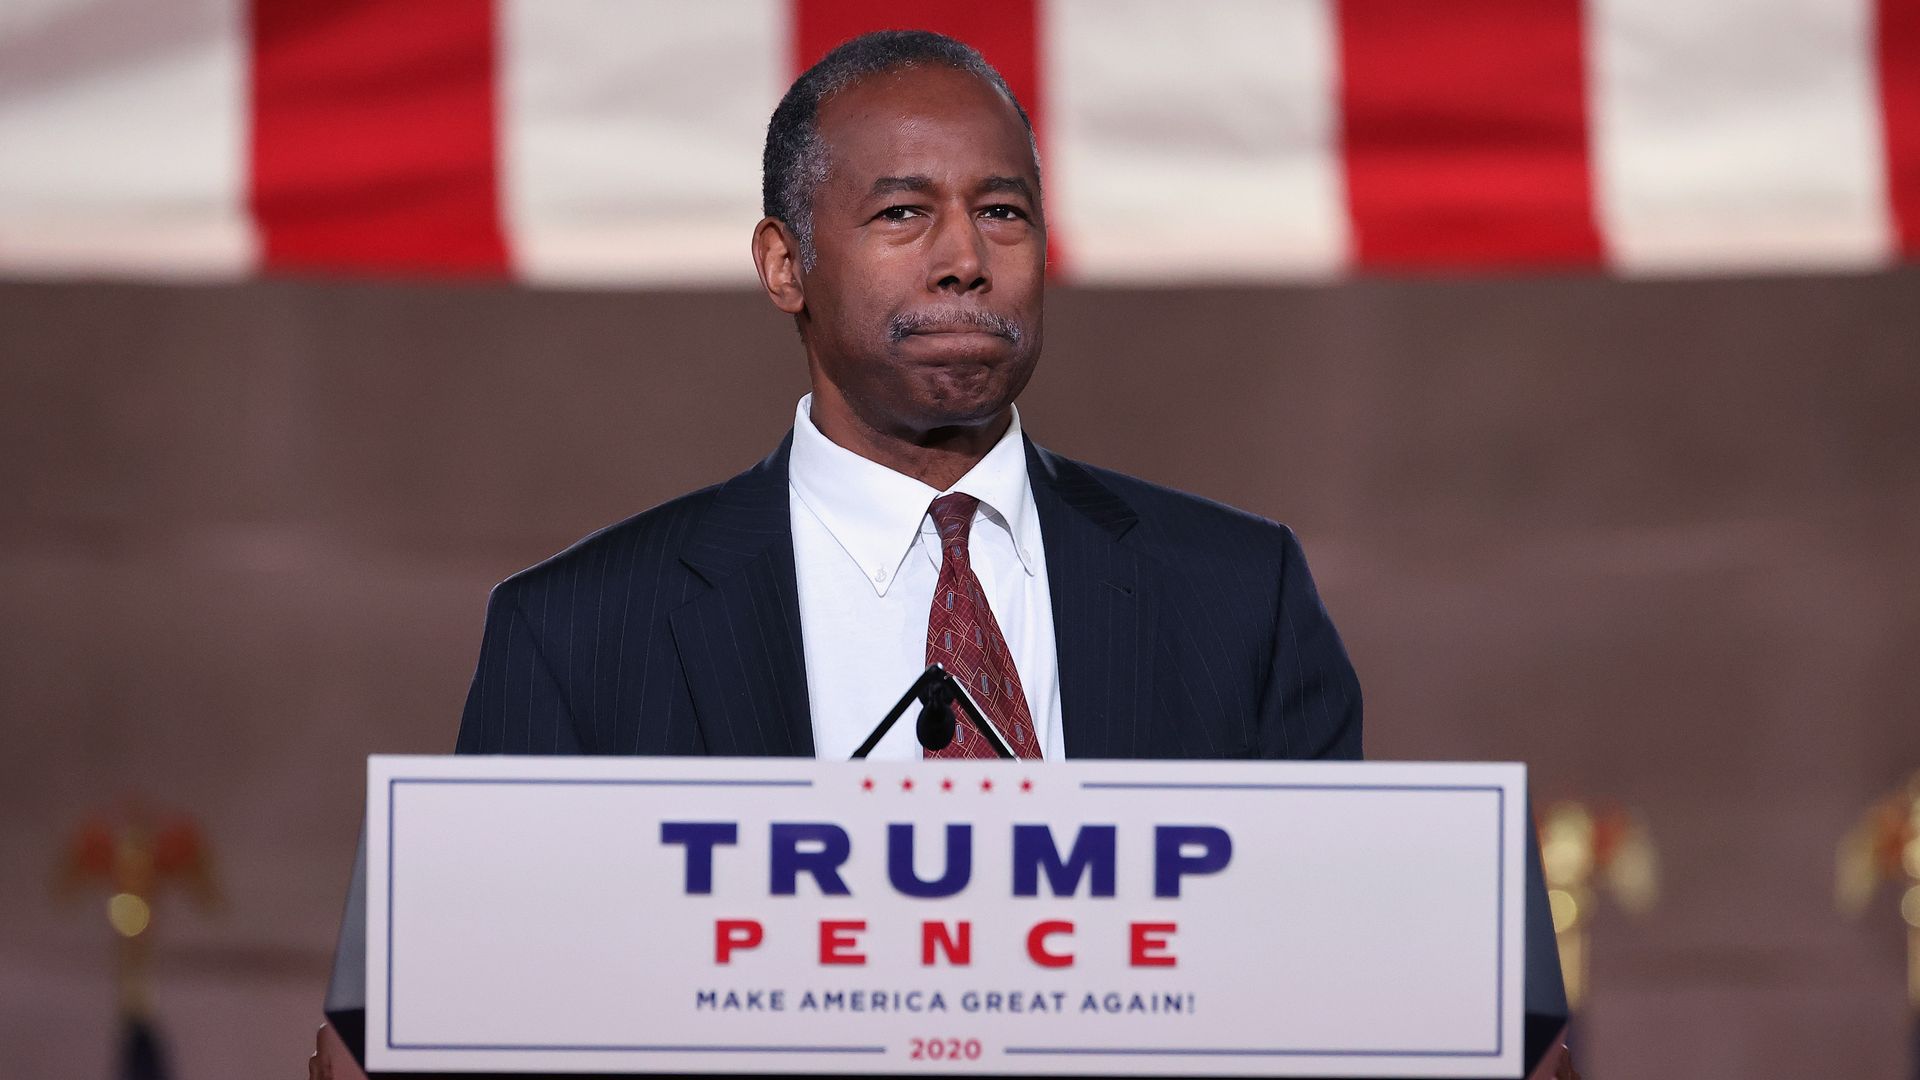 Photo of Ben Carson standing at the podium speaking at a Trump/Pence event